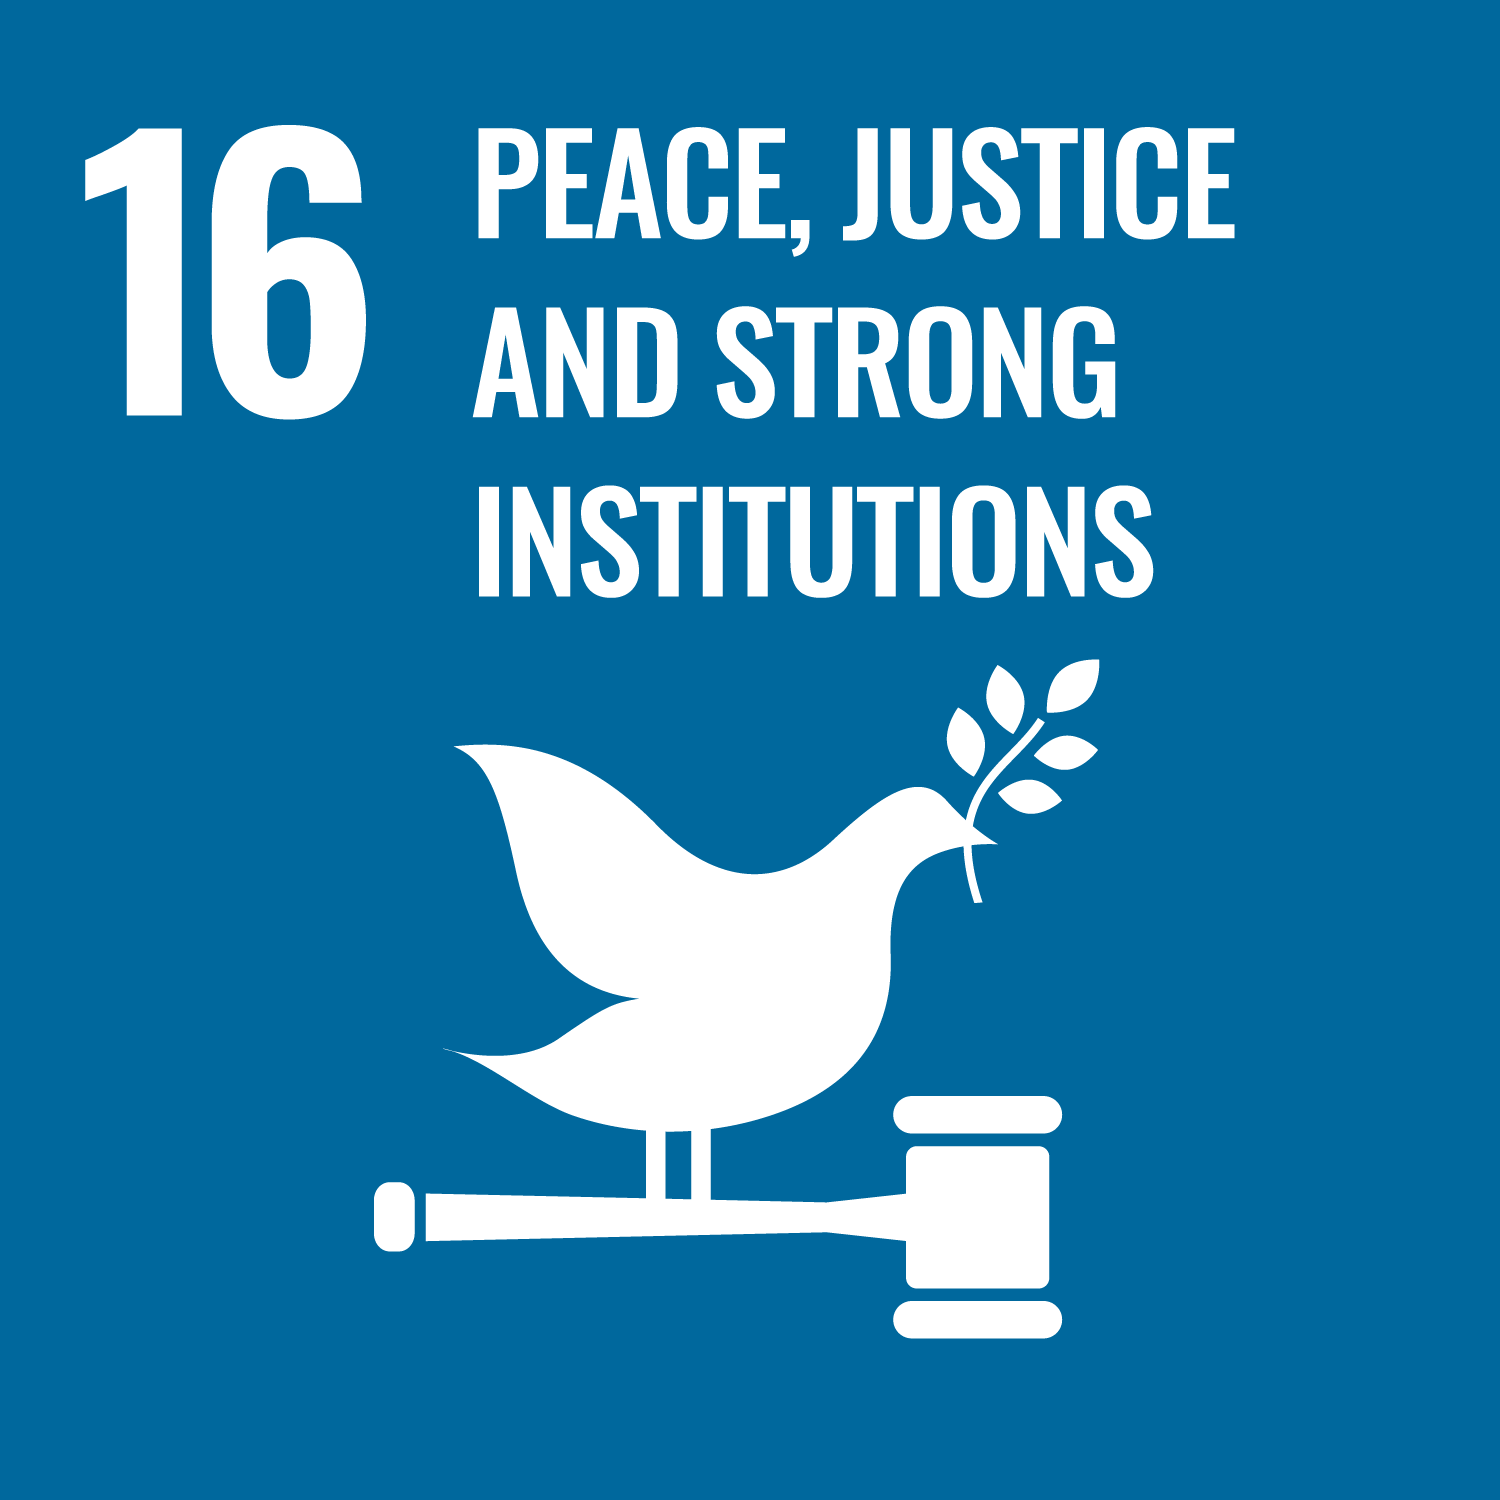 United Nations Sustainable Development Goal Number 16 Peace, Justice, and Strong Institutions